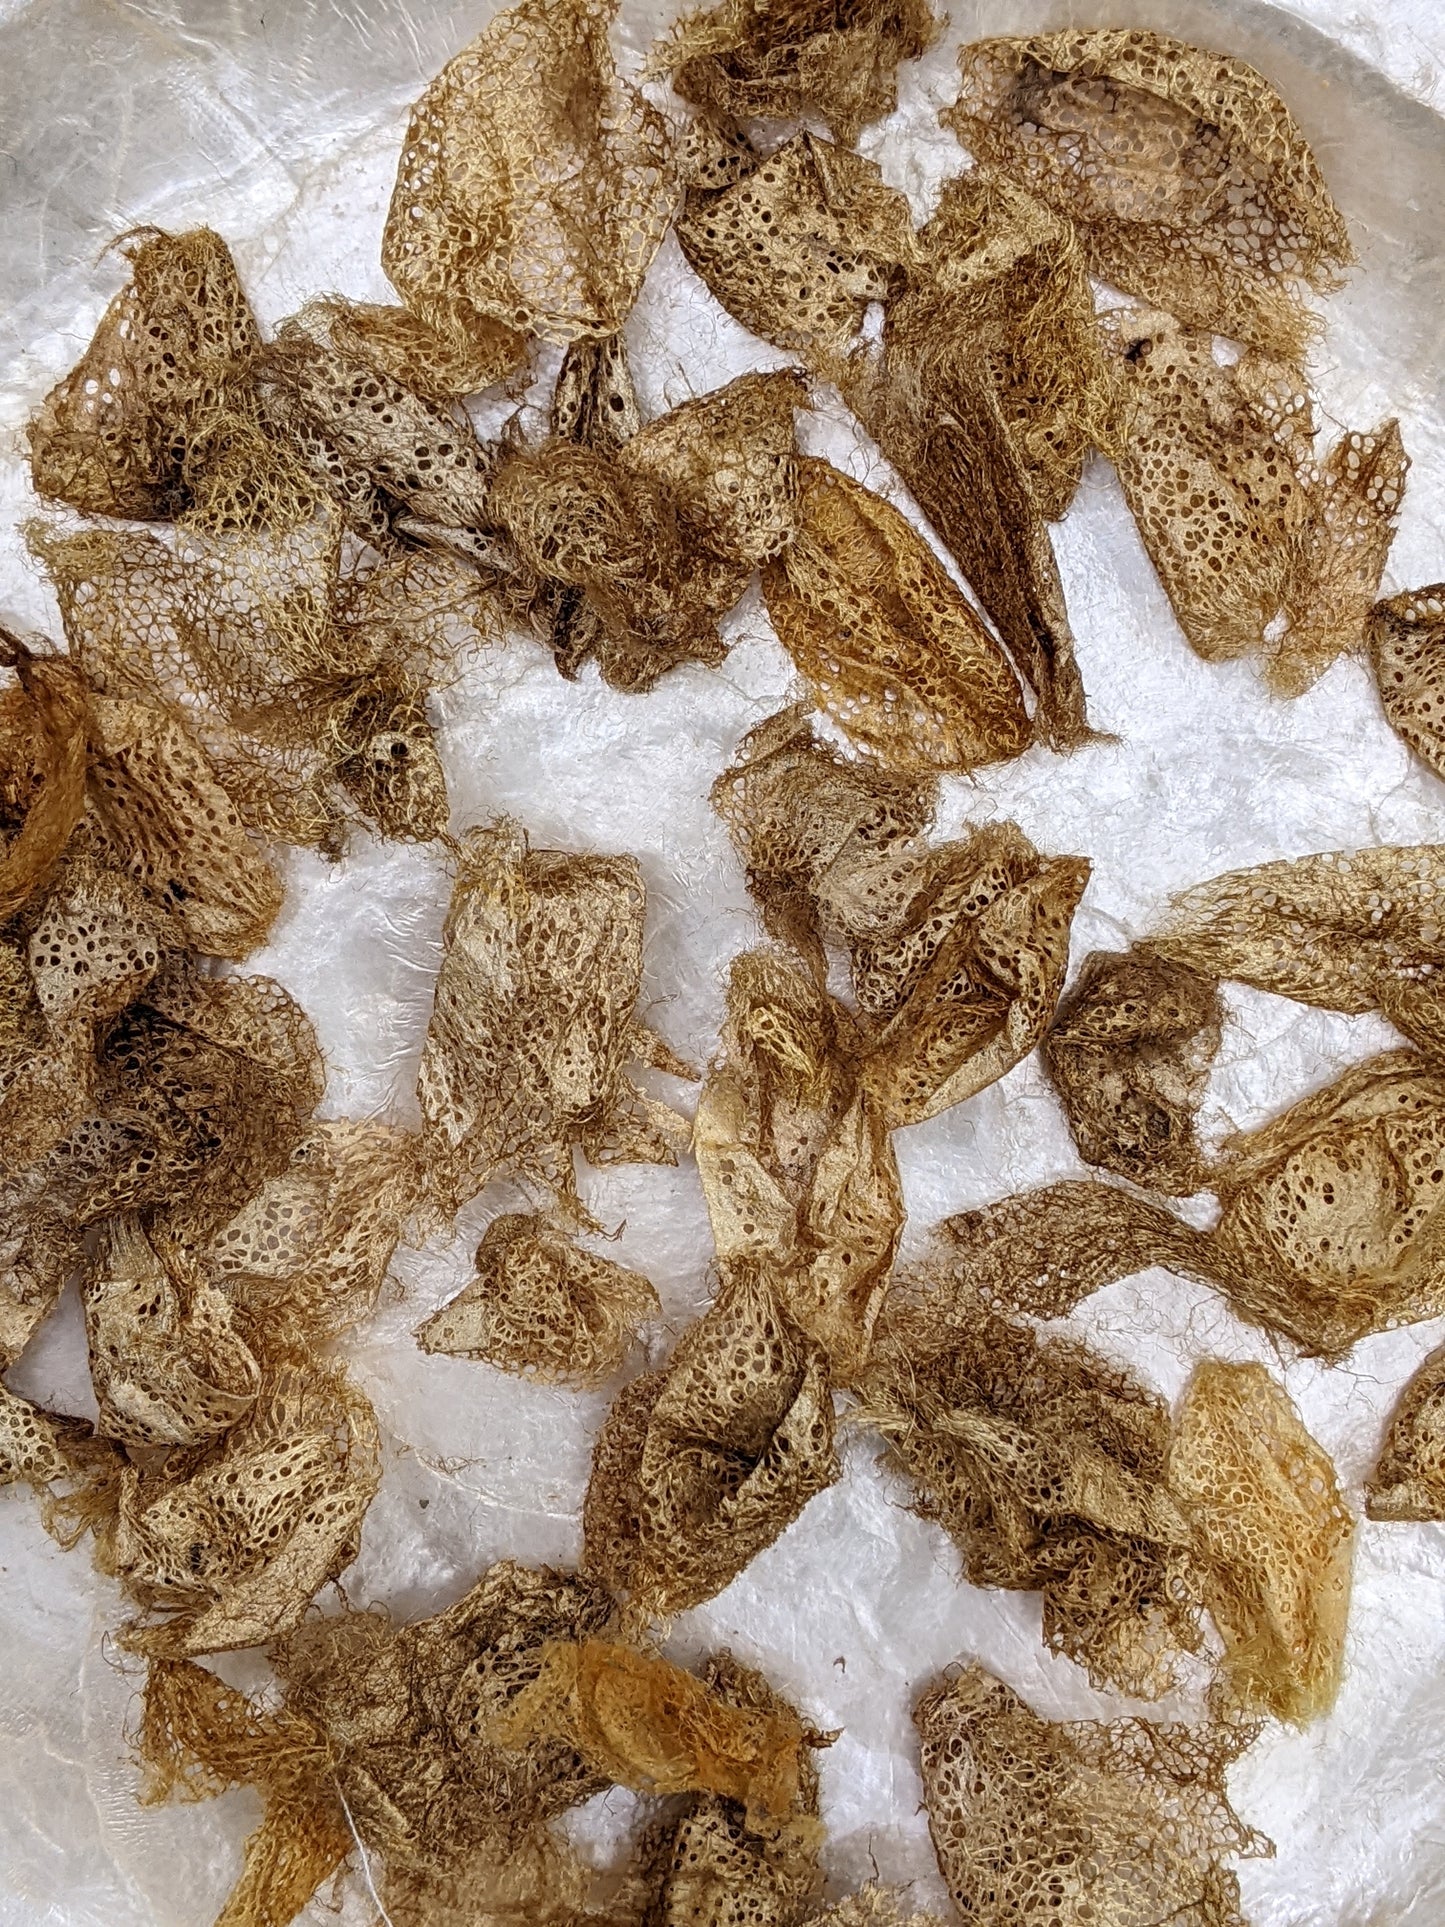 Rare Indonesian wild gathered natural gold lace silk cocoons